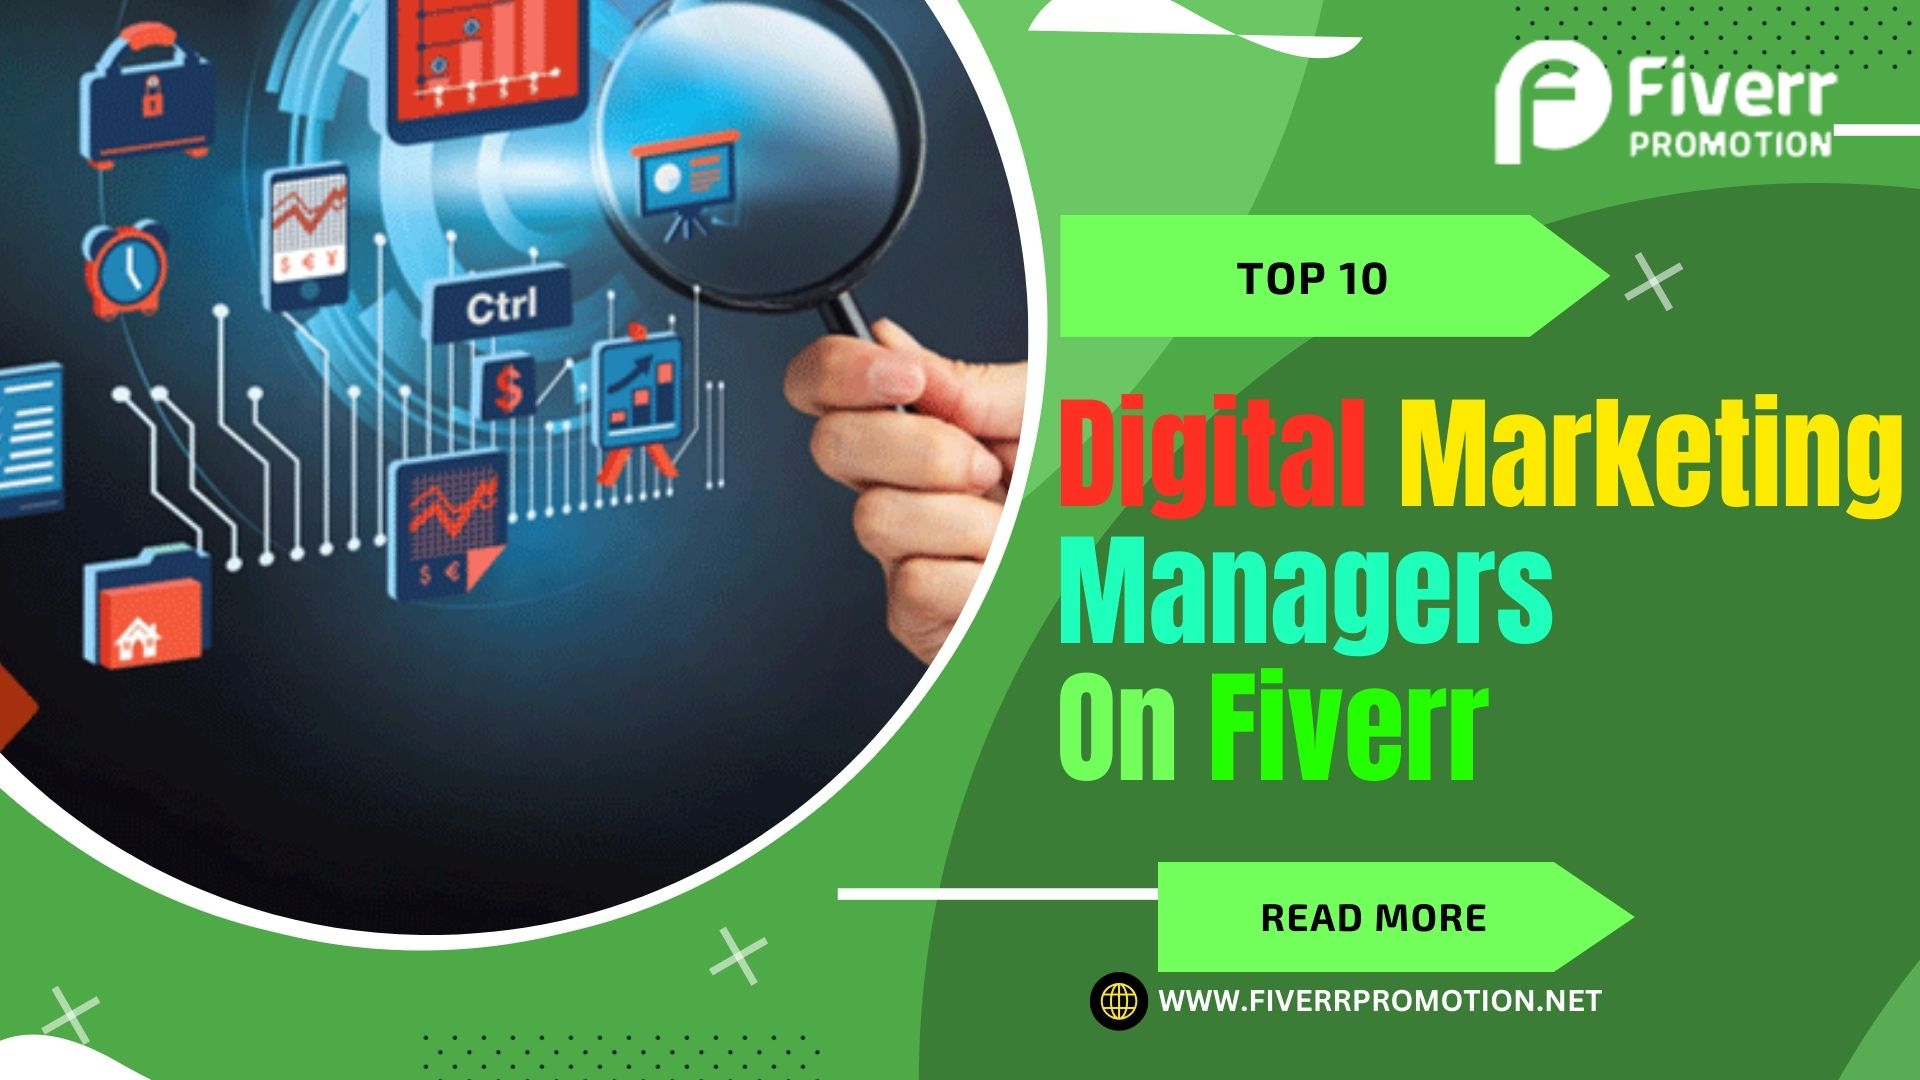 Top 10 Digital Marketing Managers on Fiverr